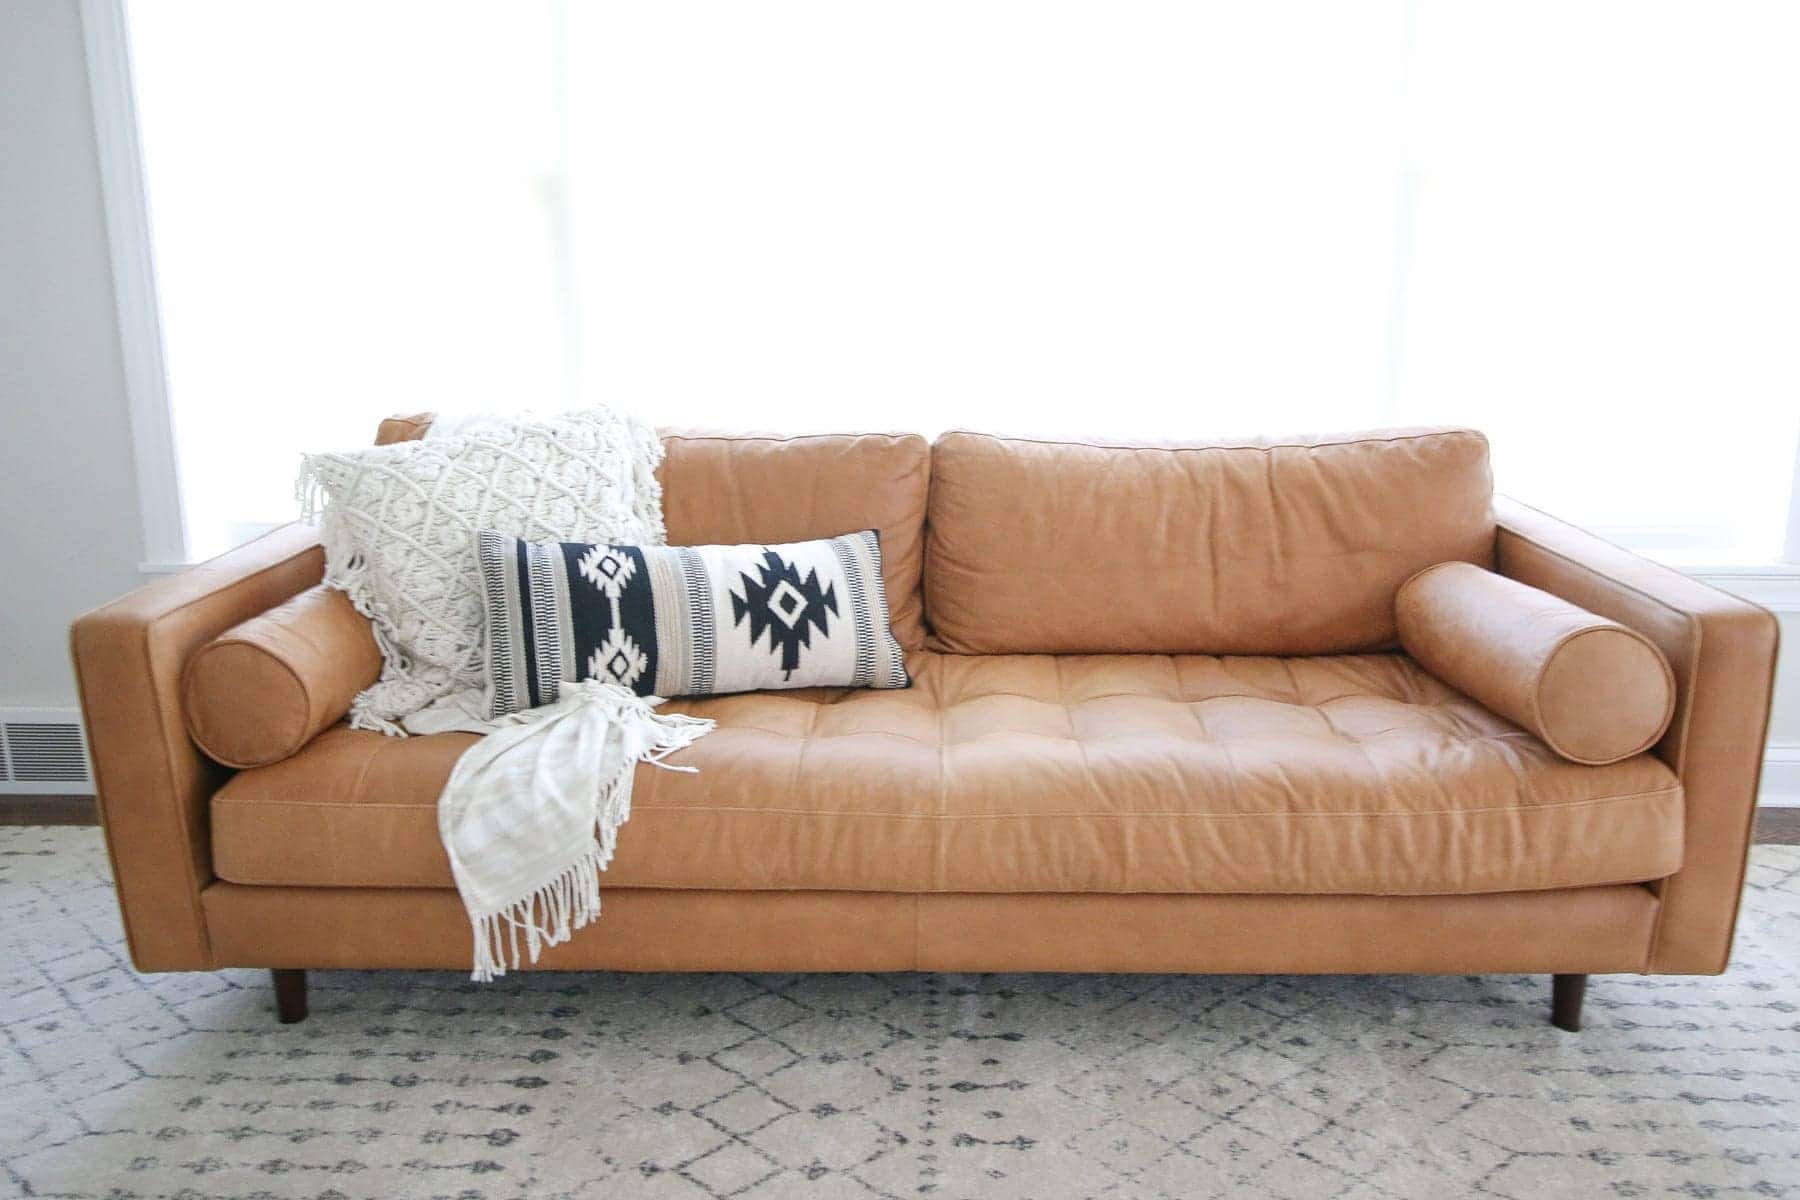 Taking a Chance On A Leather Couch from Article The DIY